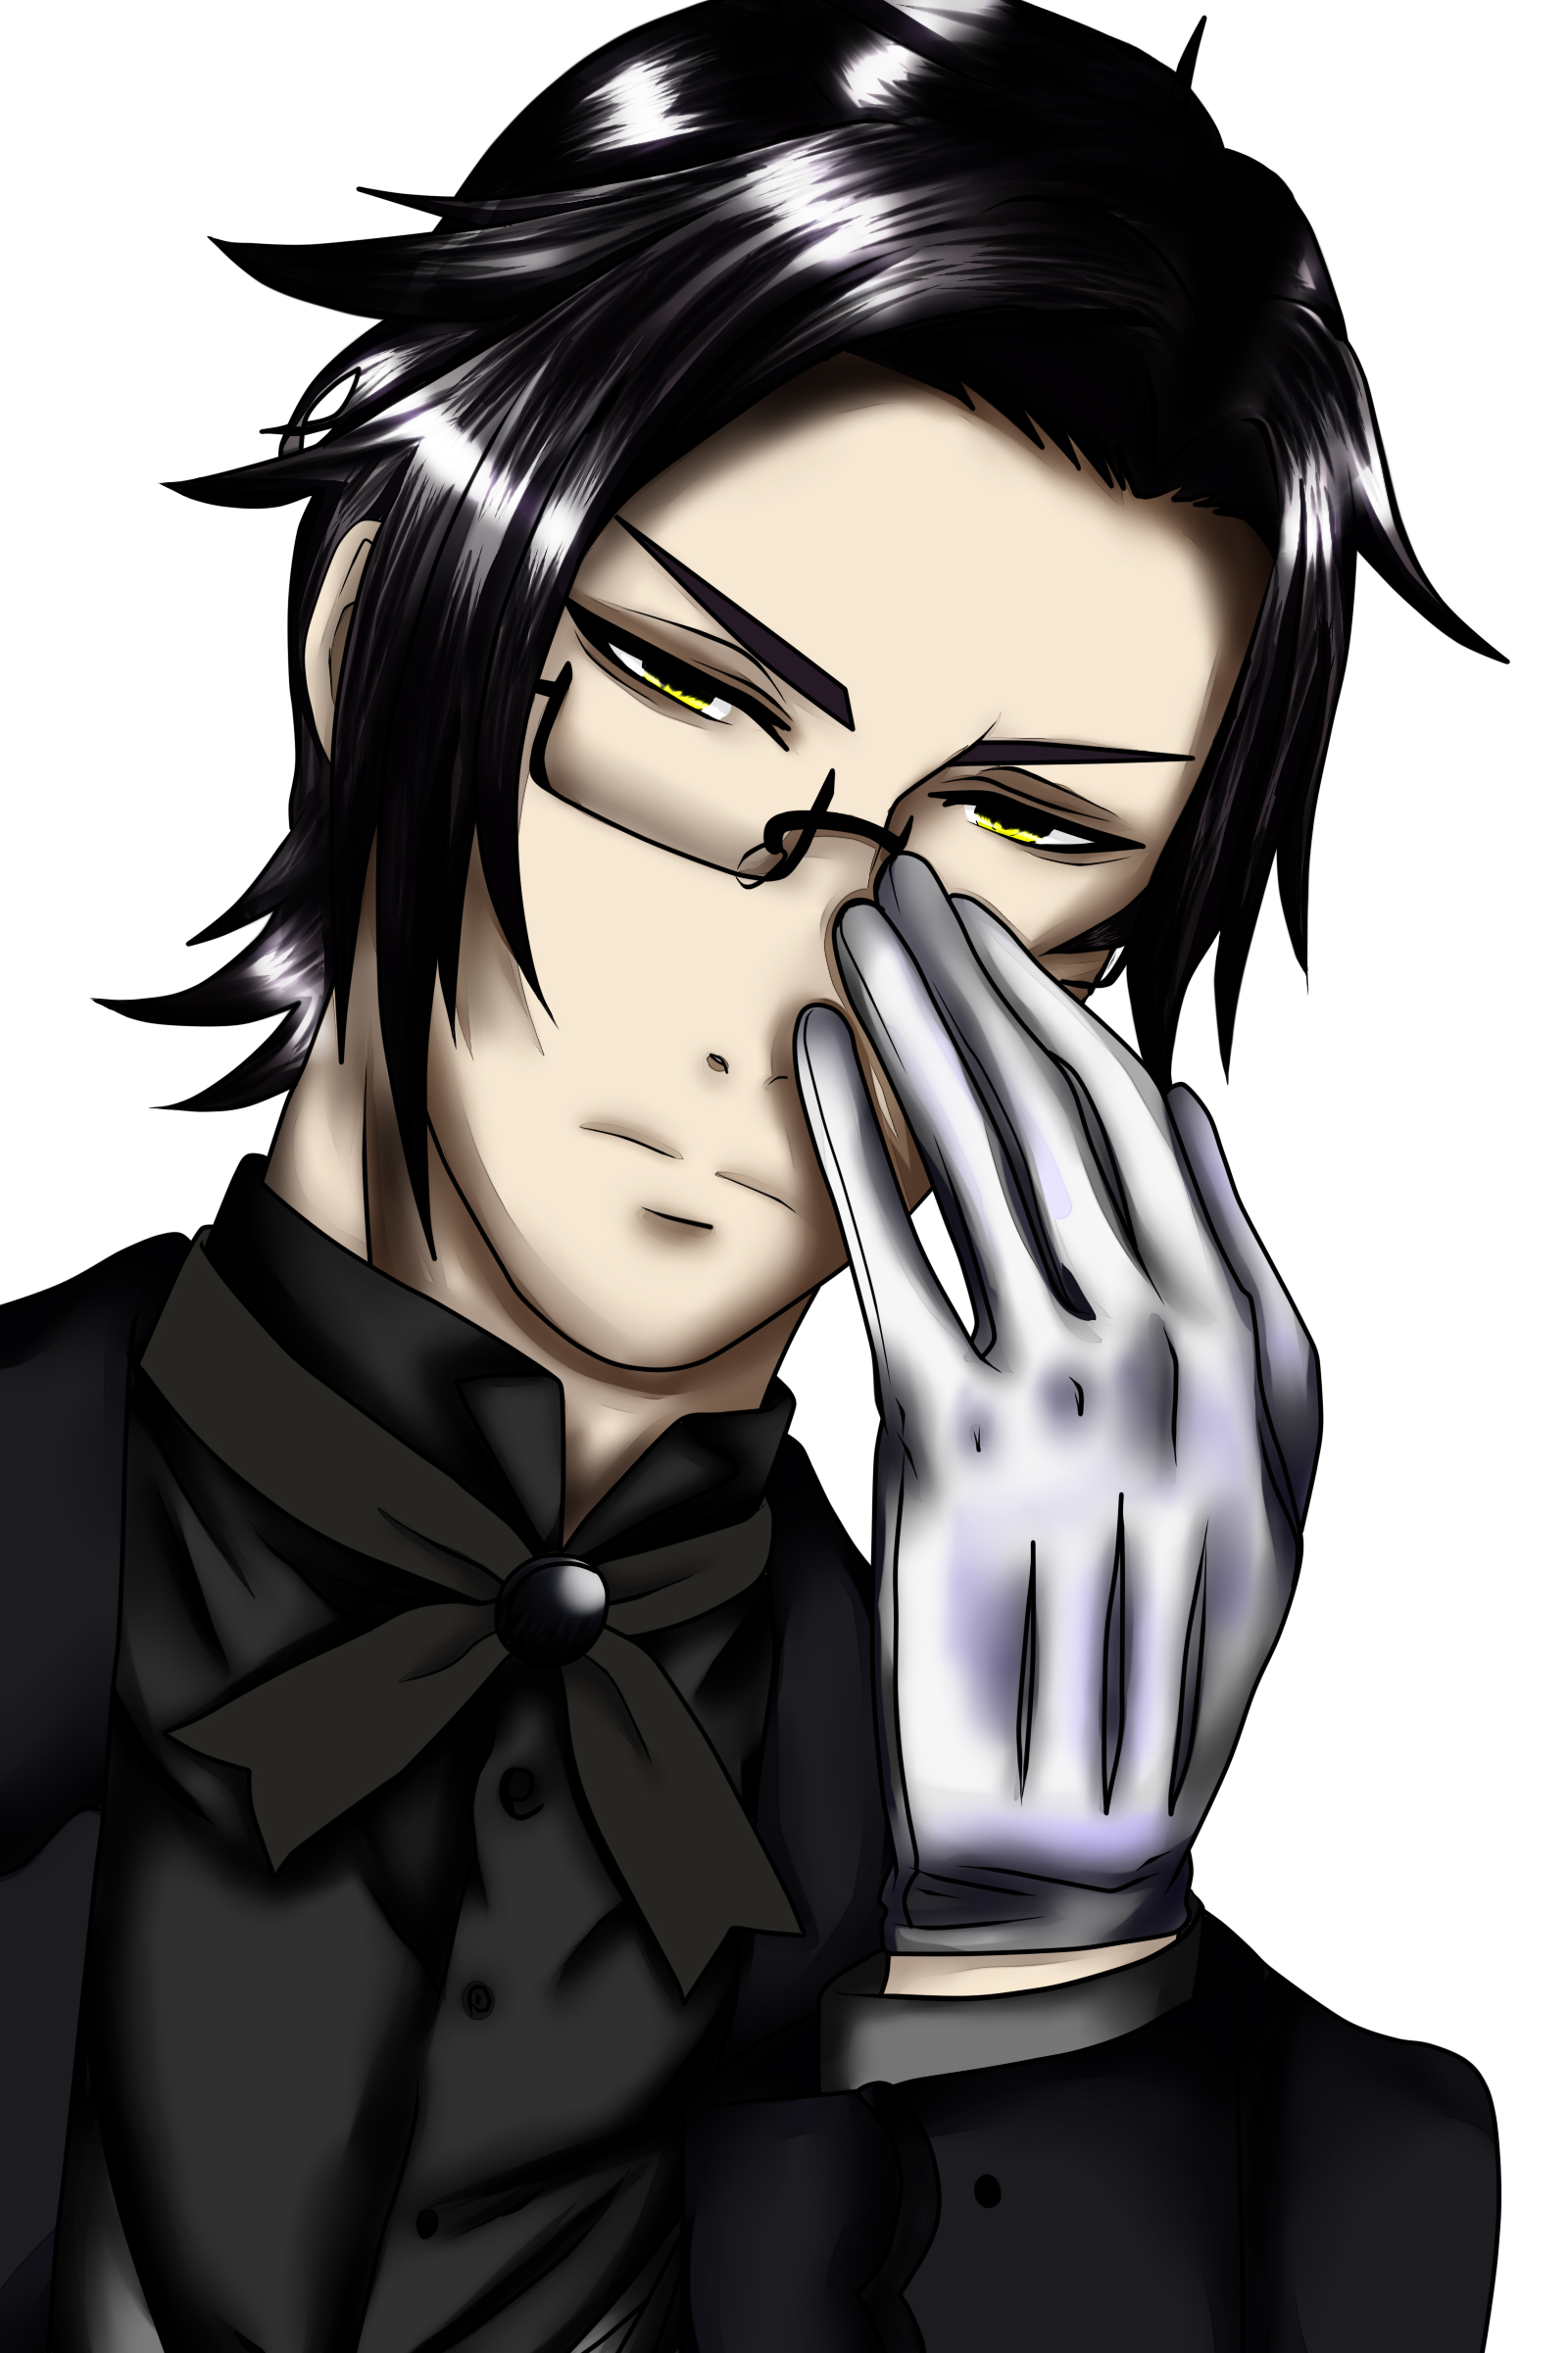 Yes Your Highness Claude Faustus by DreamEatingYuu on DeviantArt